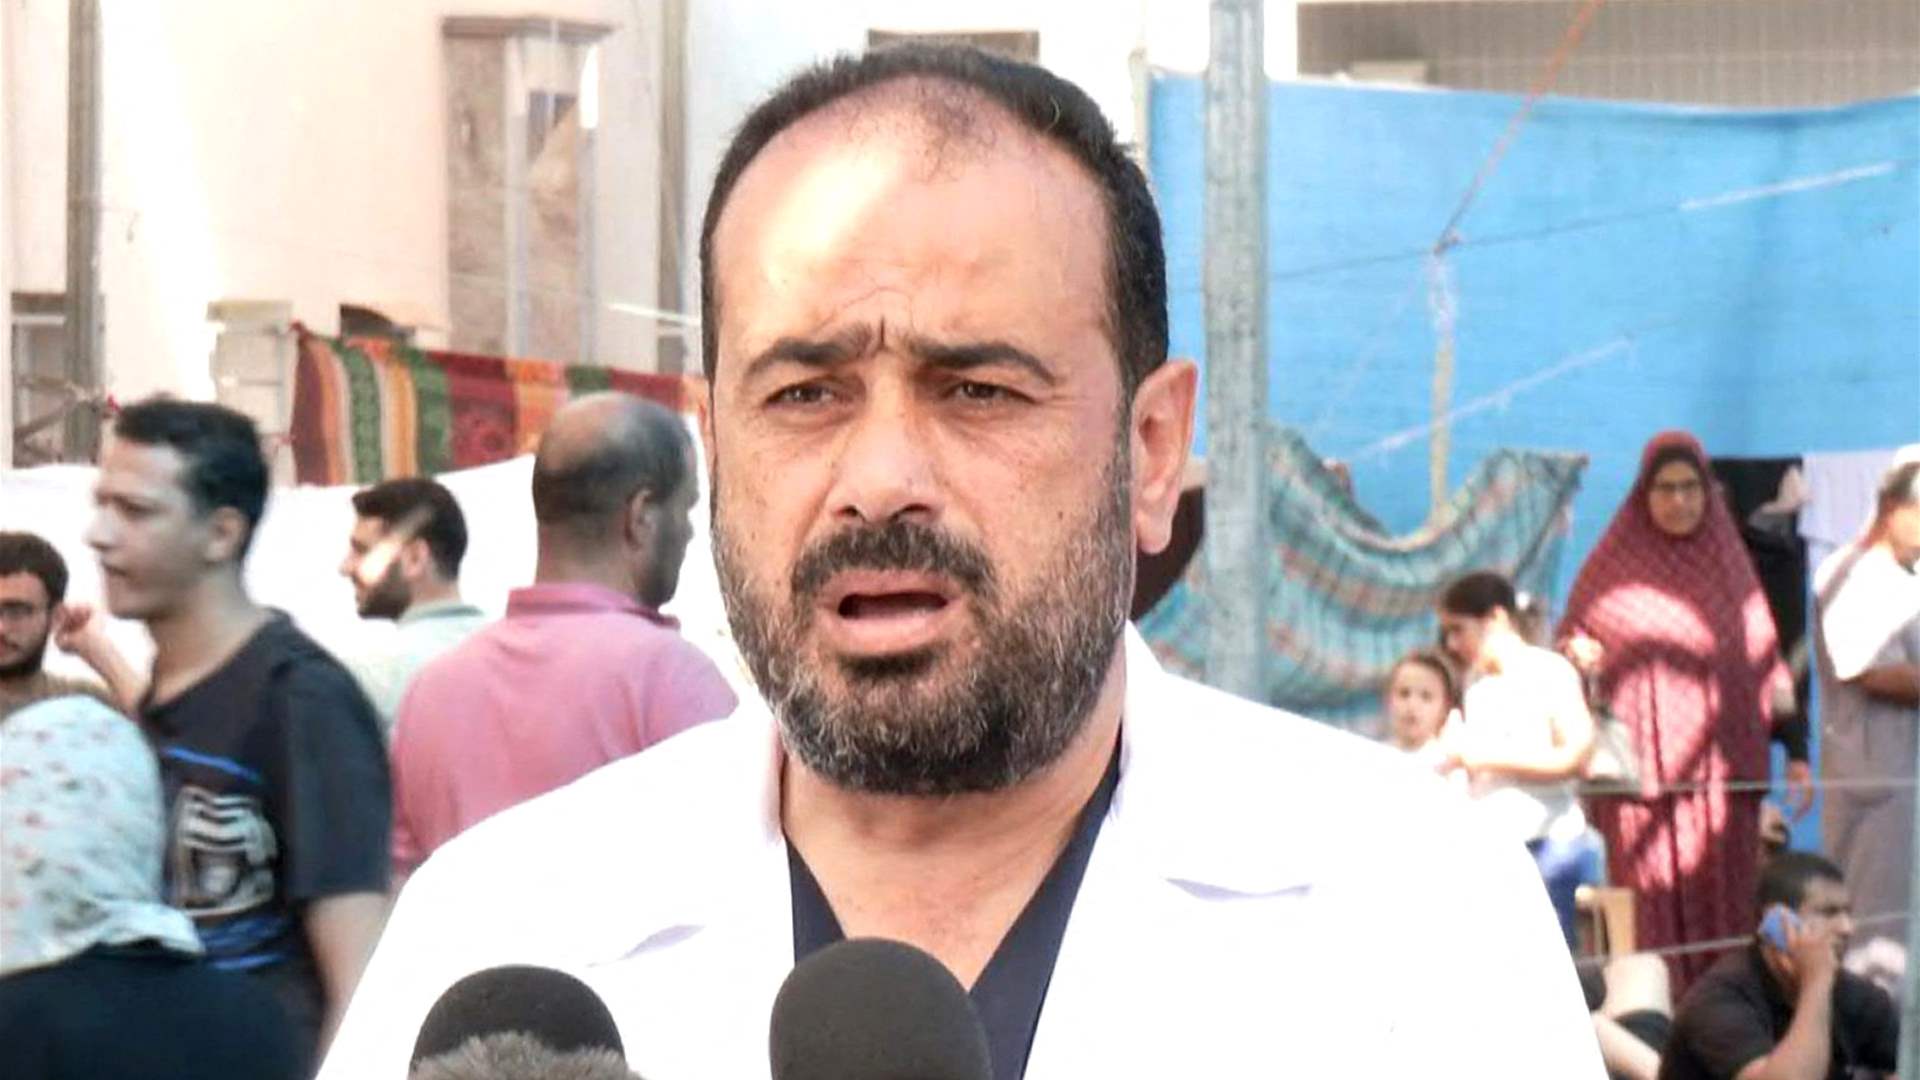 Israeli army confirms the capture of the director of Al-Shifa Hospital in Gaza and says that he is under investigation by the Shin Bet